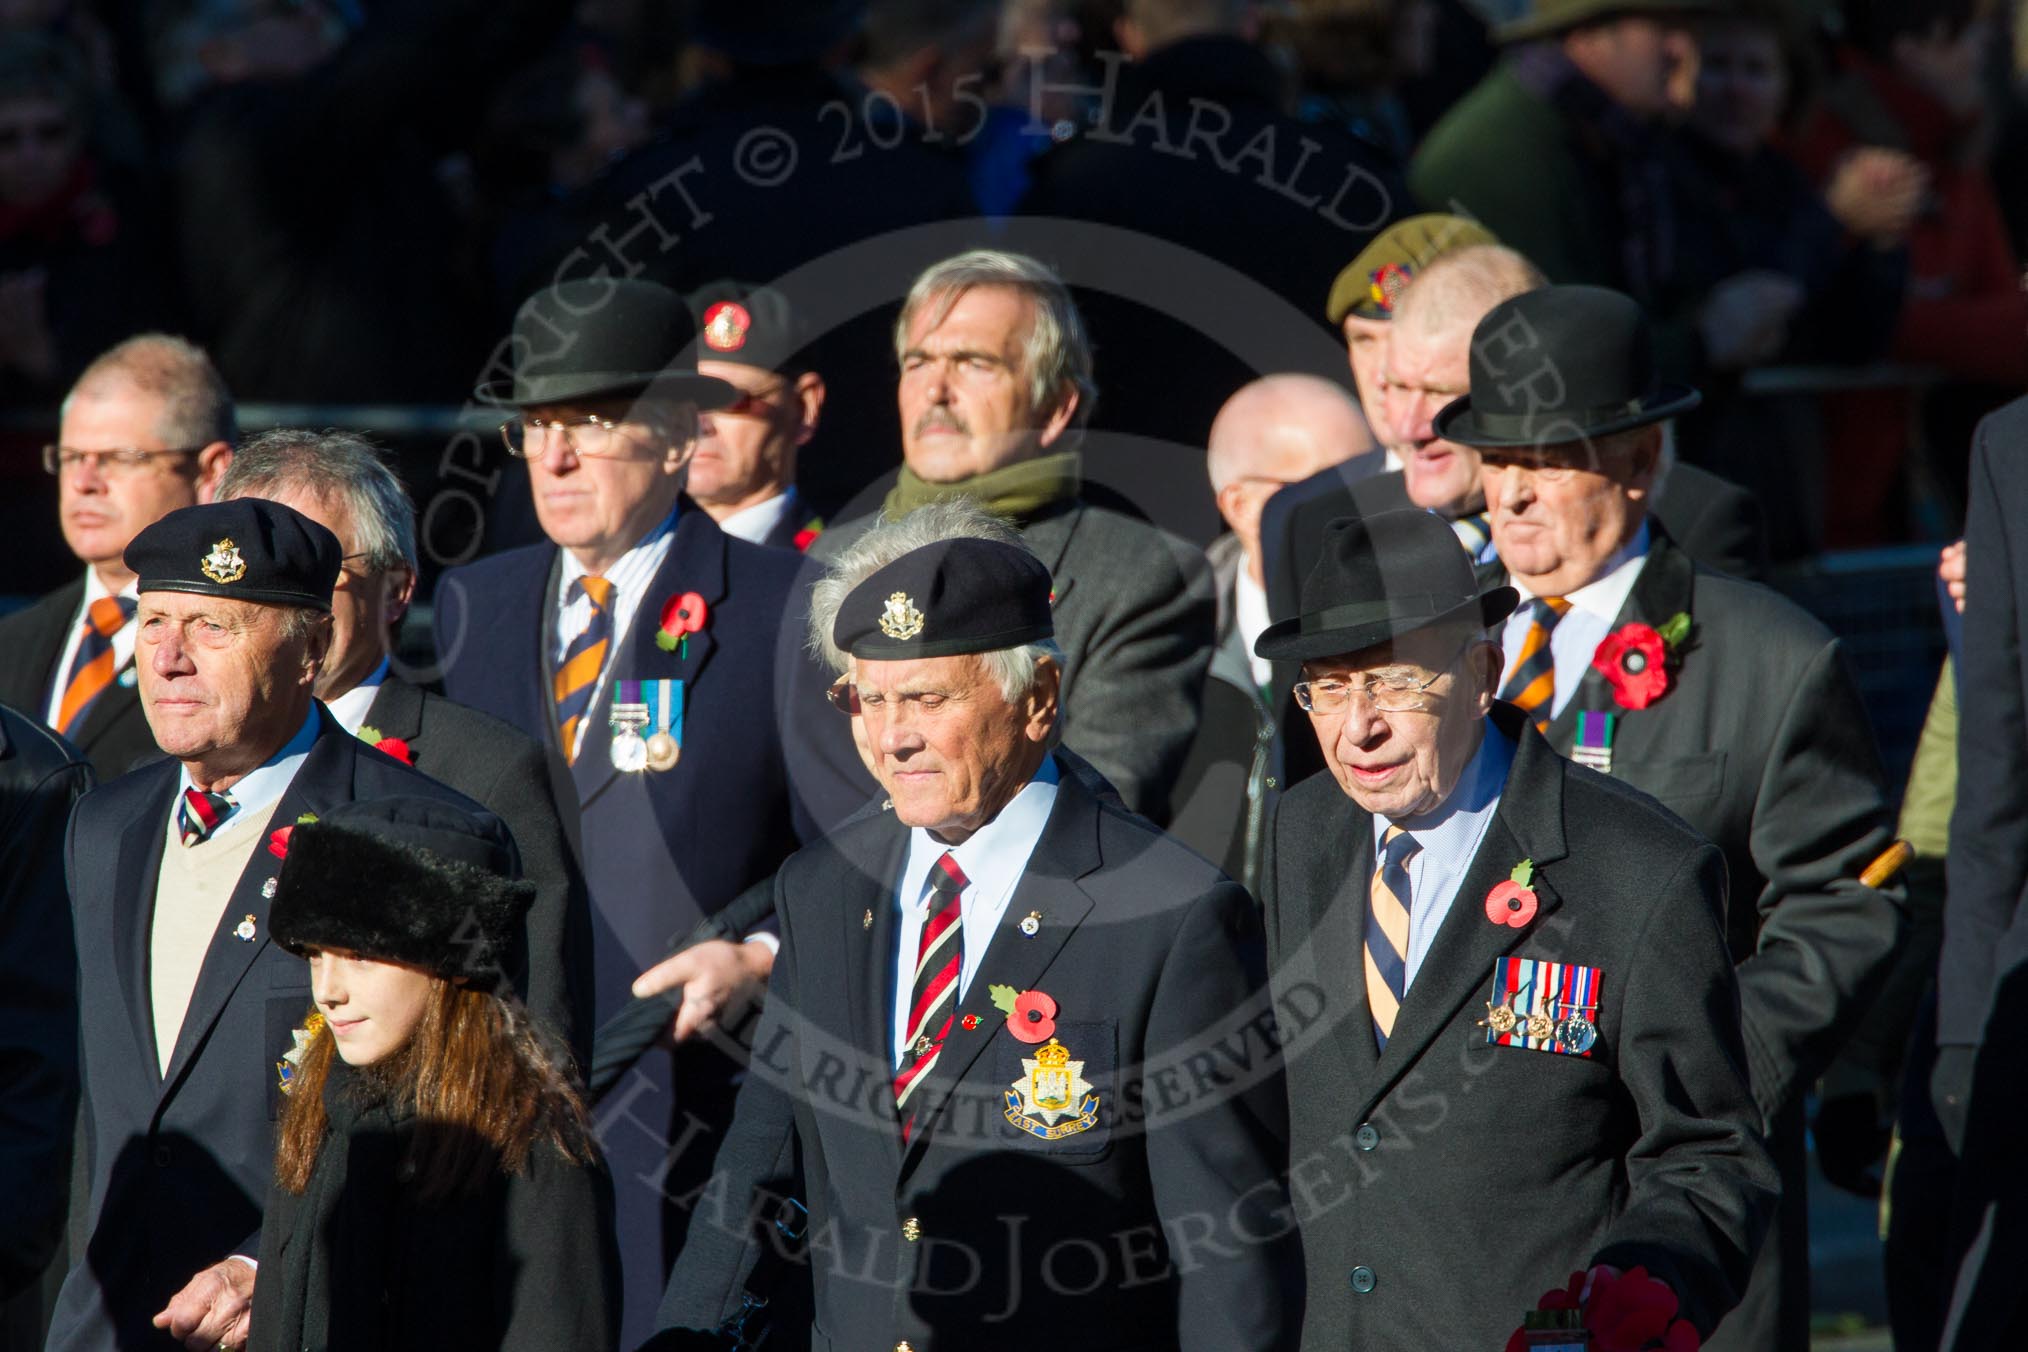 Remembrance Sunday Cenotaph March Past 2013: A32 - Royal East Kent Regiment (The Buffs) Past & Present Association..
Press stand opposite the Foreign Office building, Whitehall, London SW1,
London,
Greater London,
United Kingdom,
on 10 November 2013 at 11:58, image #1283